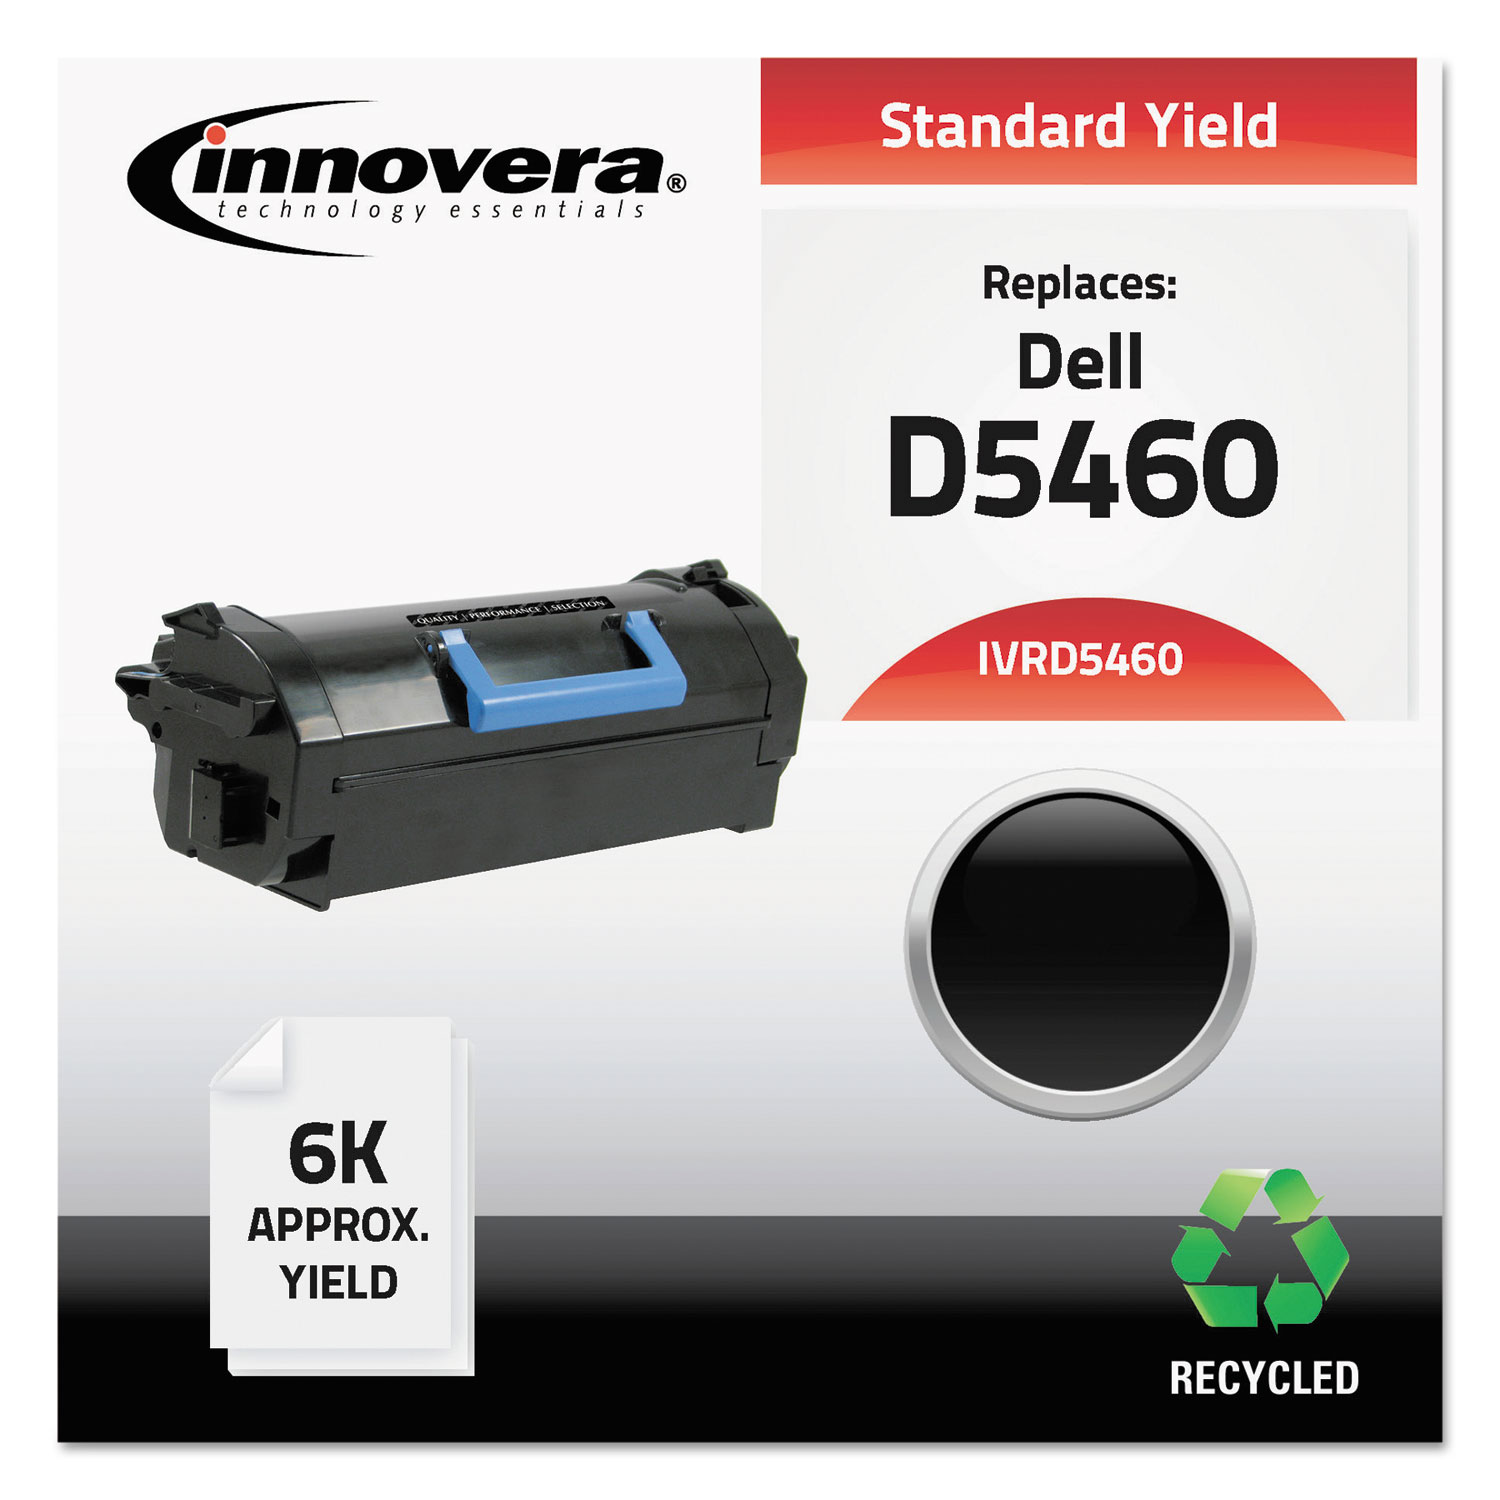 Remanufactured 3319797 (B5460) Toner, 6000 Page-Yield, Black